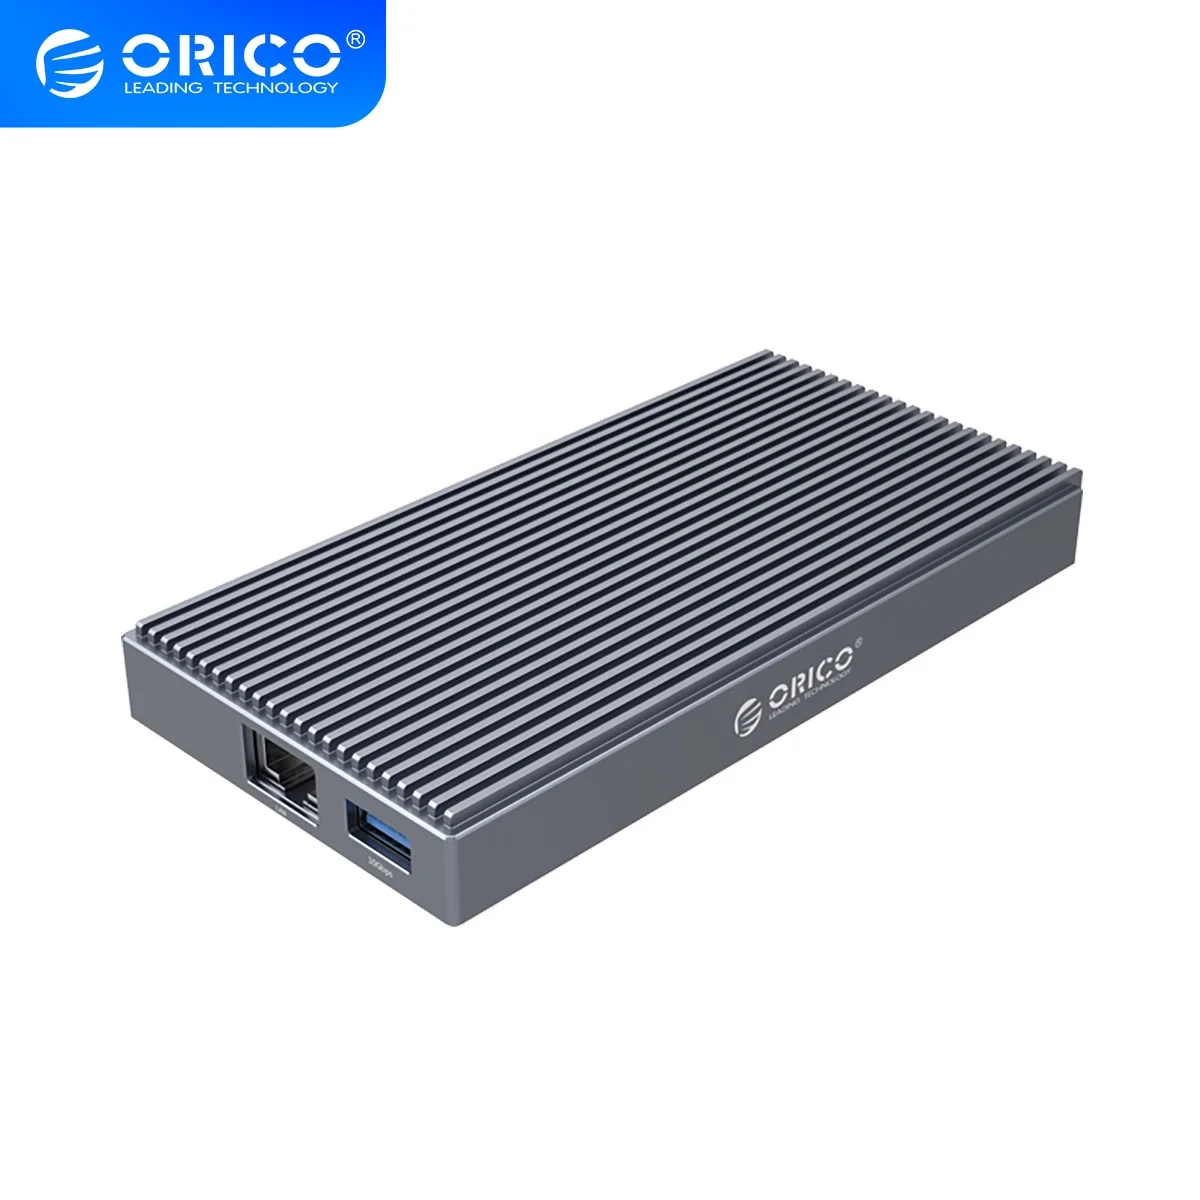 Orico Nvme Ssd Hub 10gpbs 2tb Aluminum Alloy 9-in-1 Type-c Docking Station  With Ssd Enclosure Cdh-9n - Buy 10gbps Docking Station,Nvme Ssd Hub,Type-c  Docking Station With Ssd Enclosure Product on